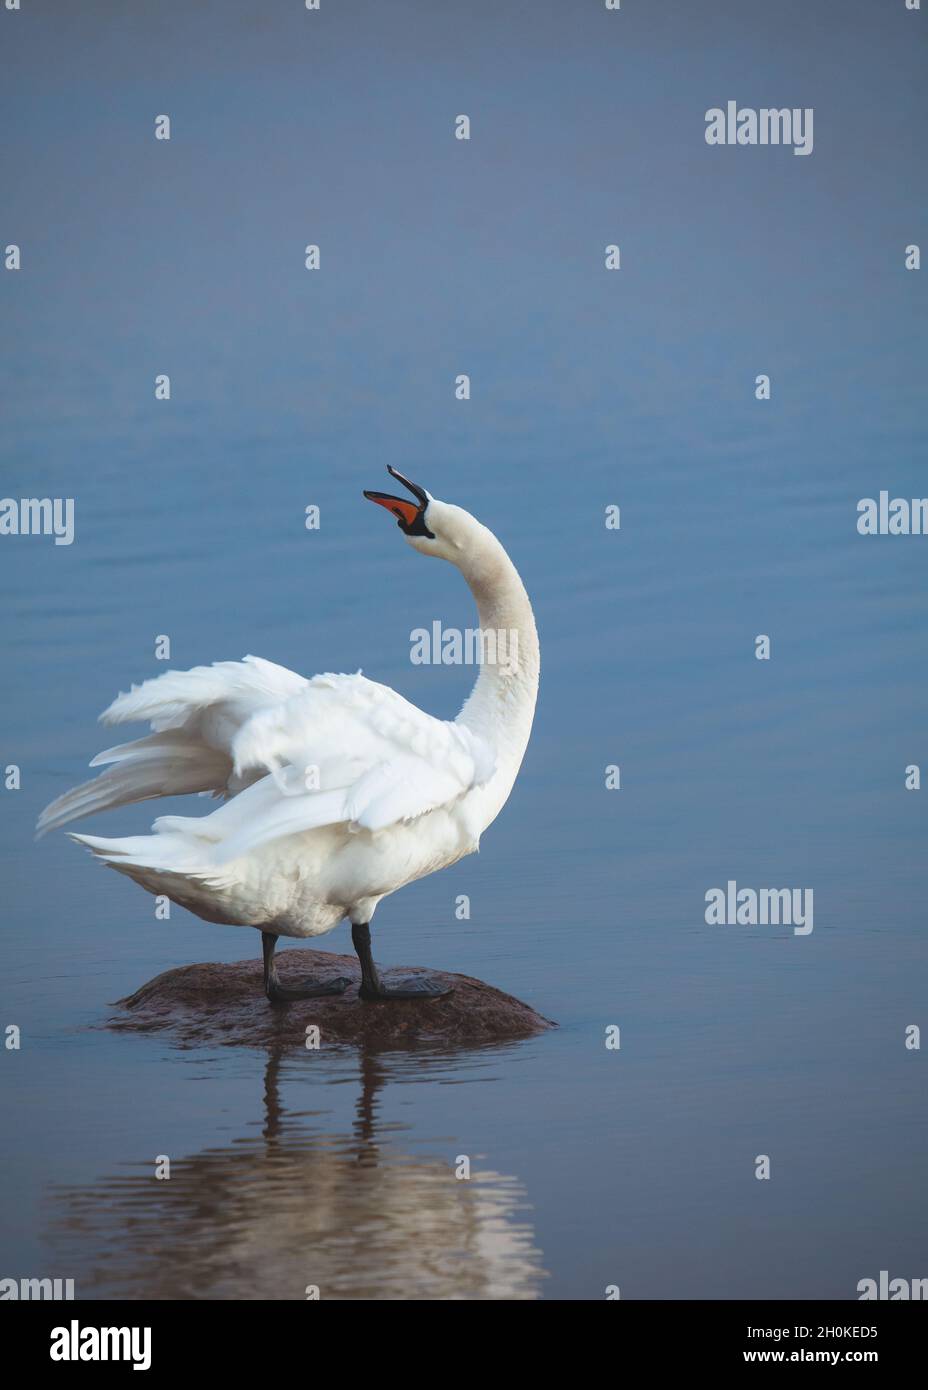 Mute swan standing on a rock in blue water and stretching its neck. Cygnus olor. Stock Photo